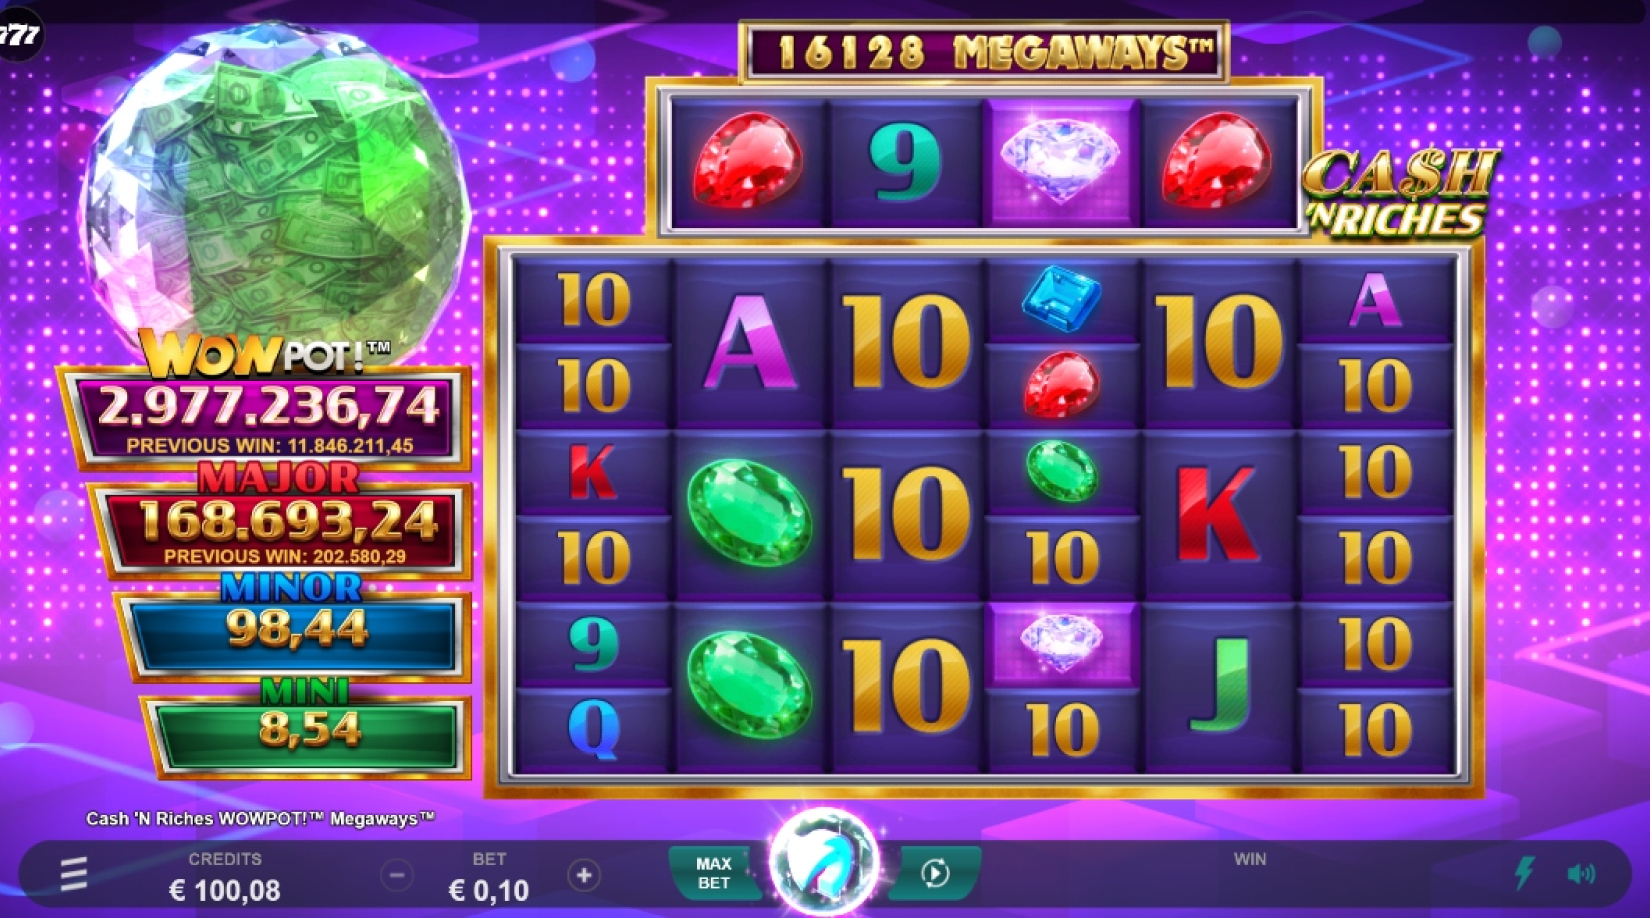 Cash ‘N Riches WowPot! Megaways Review: Should You Play It?